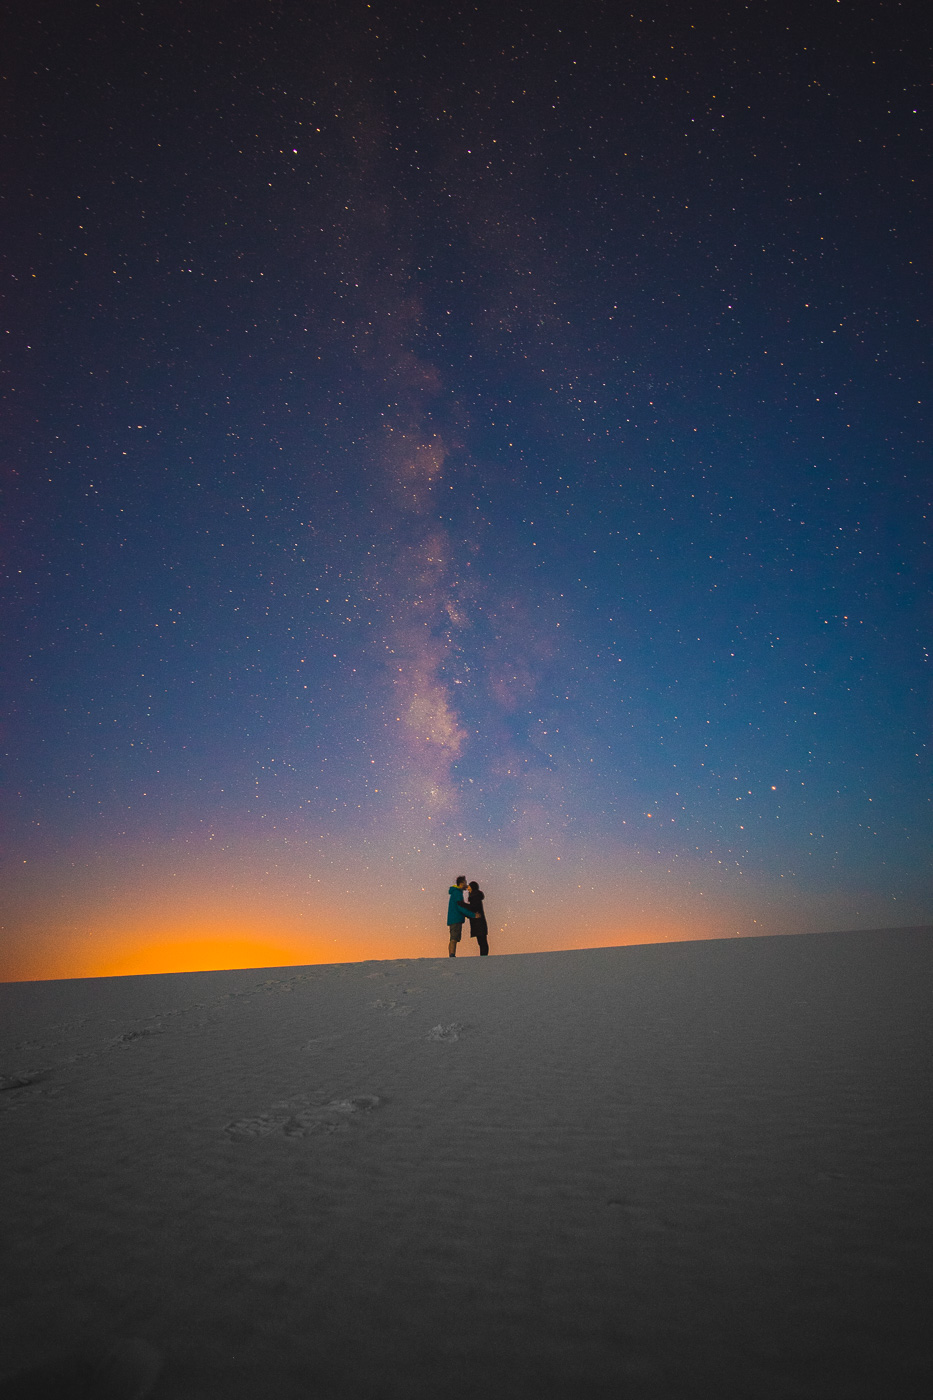 The Milky Way at White Sands National Monument